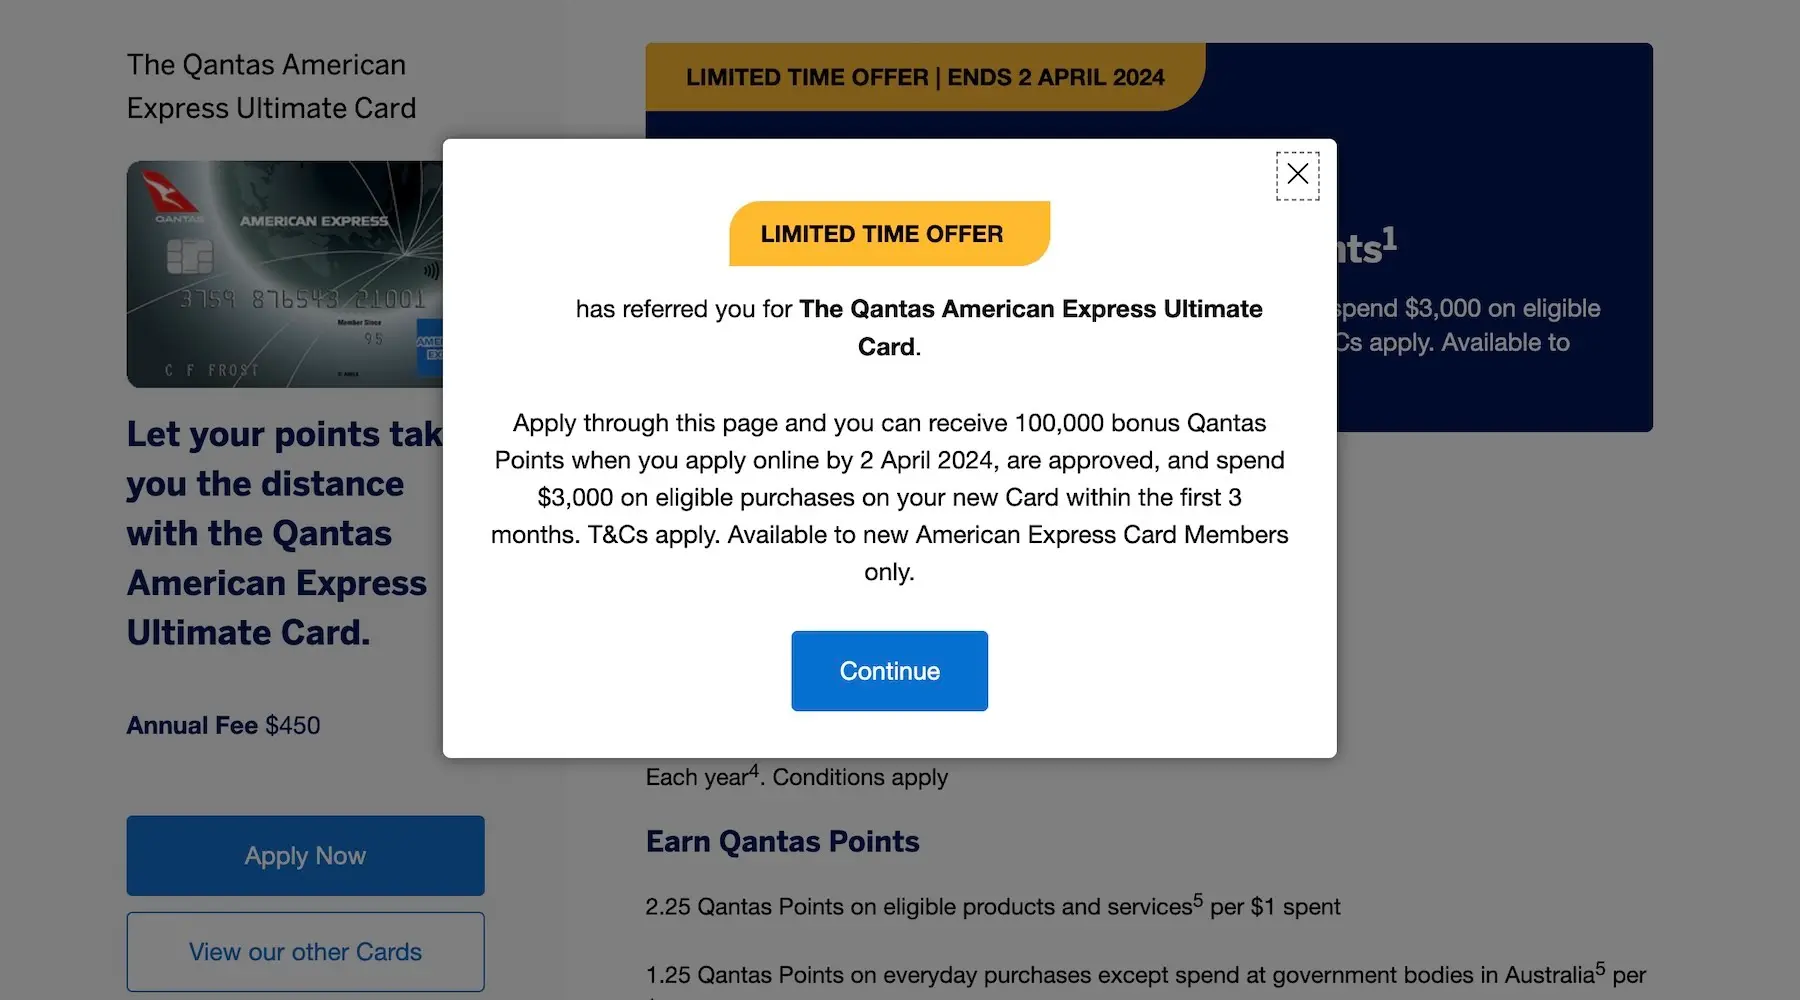 A screenshot of a referral offer for the Qantas American Express Ultimate Card, including details that it is a limited time offer.